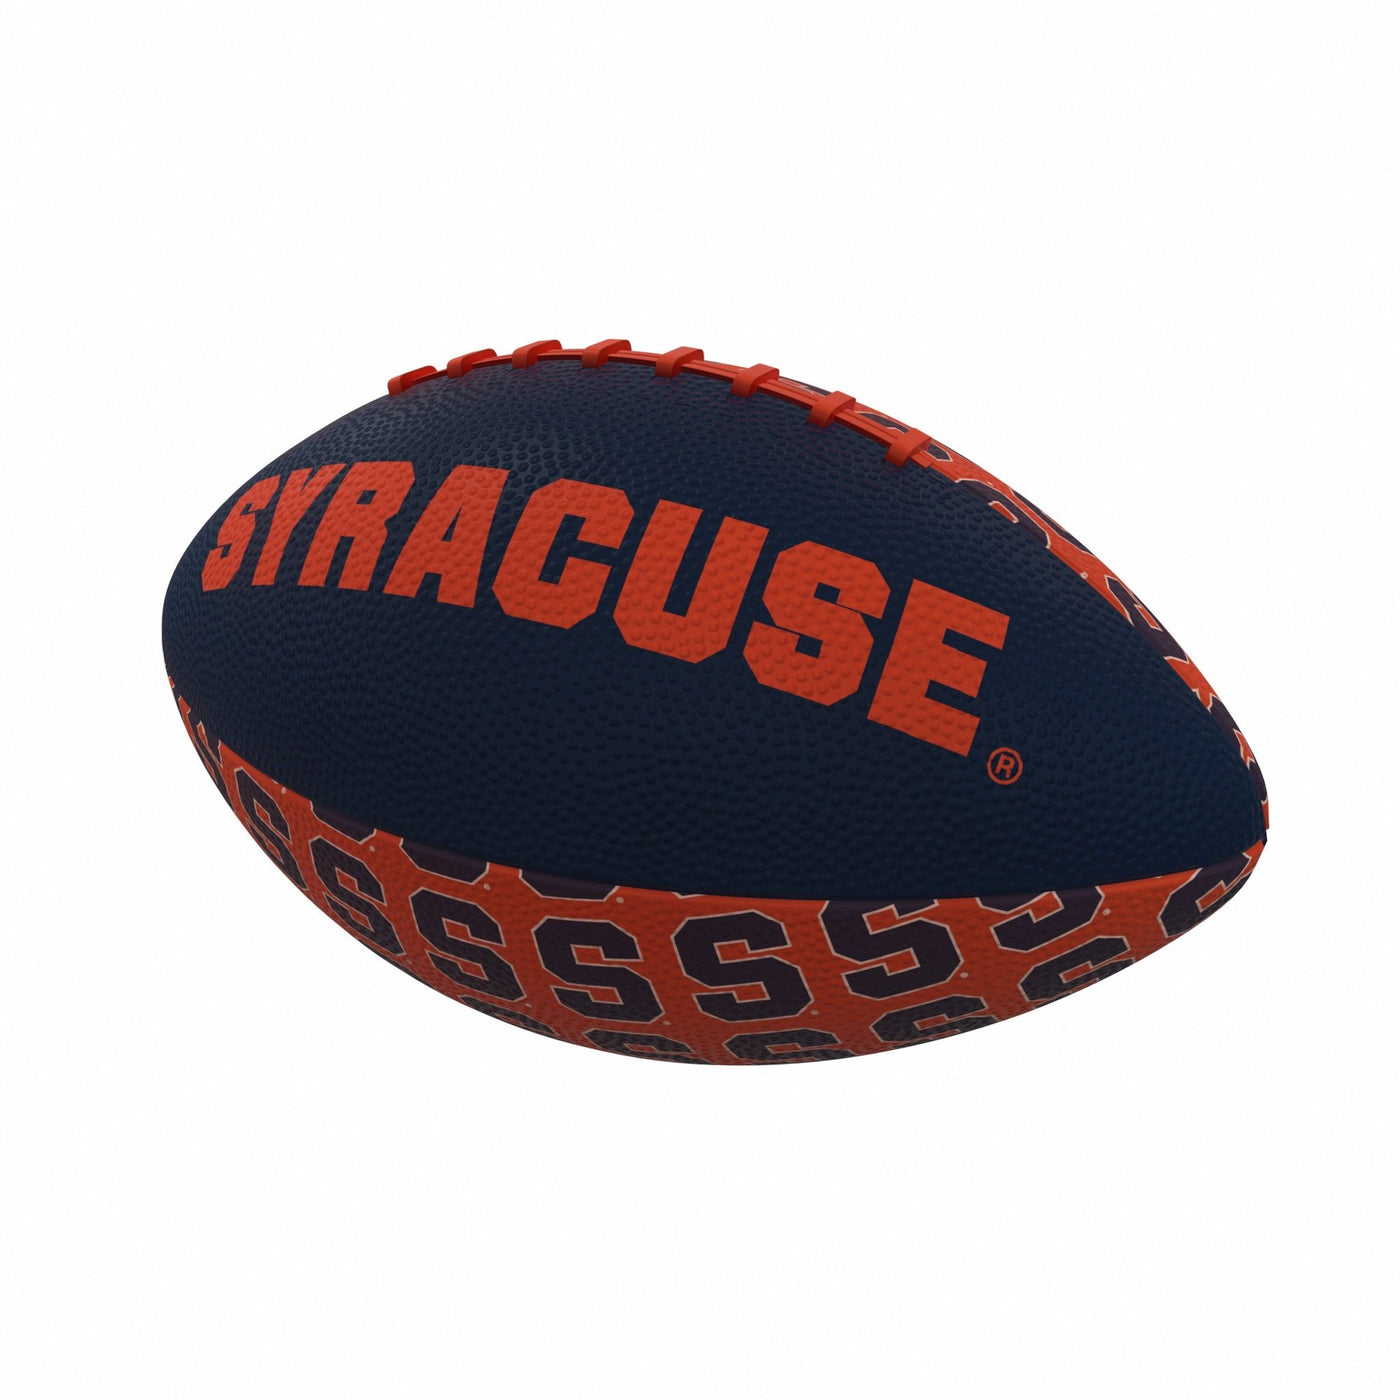 Syracuse Repeating Mini-Size Rubber Football - Logo Brands